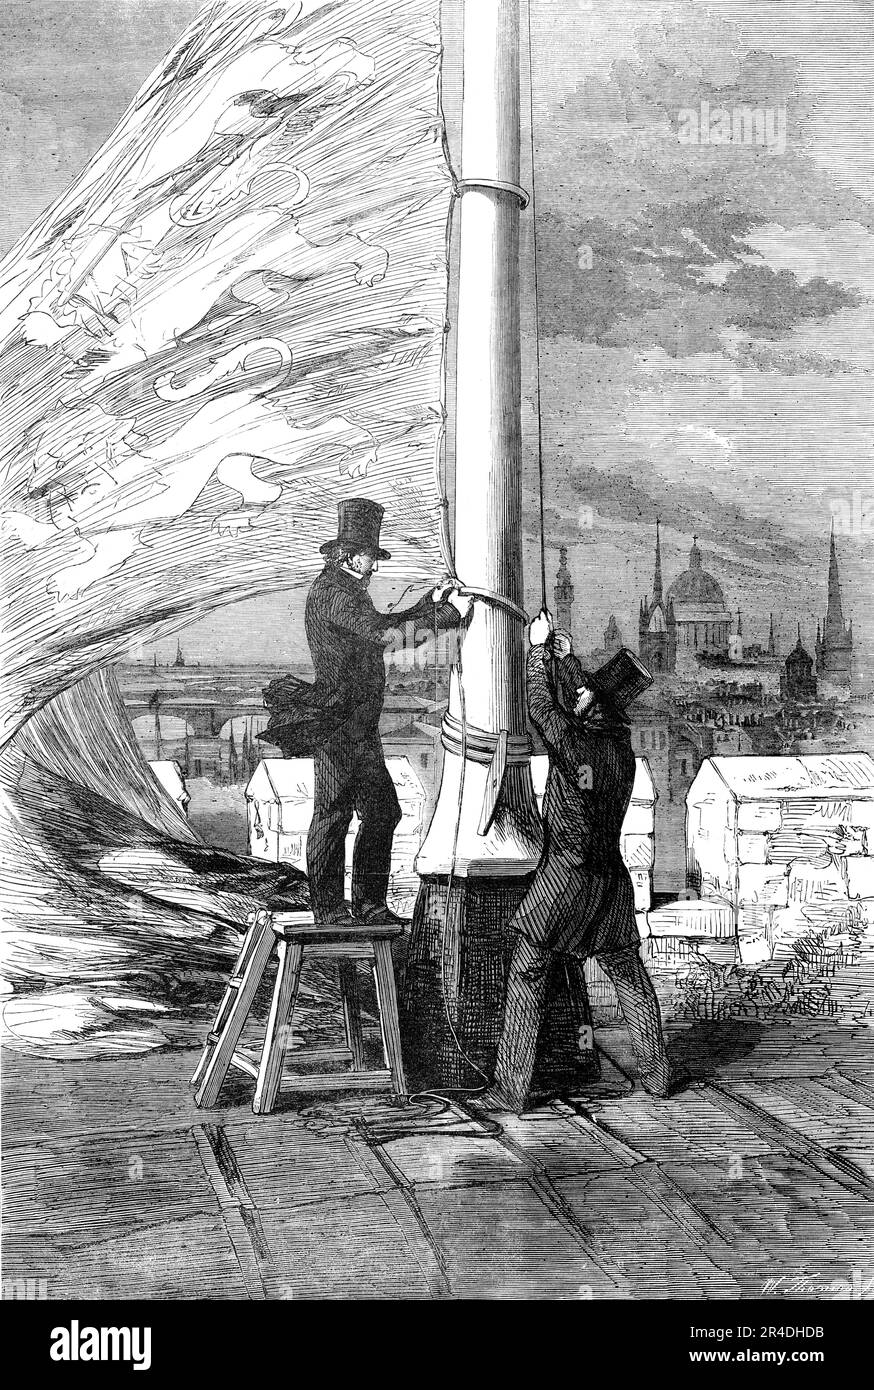 The Peace Rejoicings - Hoisting the Royal Standard at the Tower of London, 1856. Celebrating the end of the Crimean War. From &quot;Illustrated London News&quot;, 1856. Stock Photo